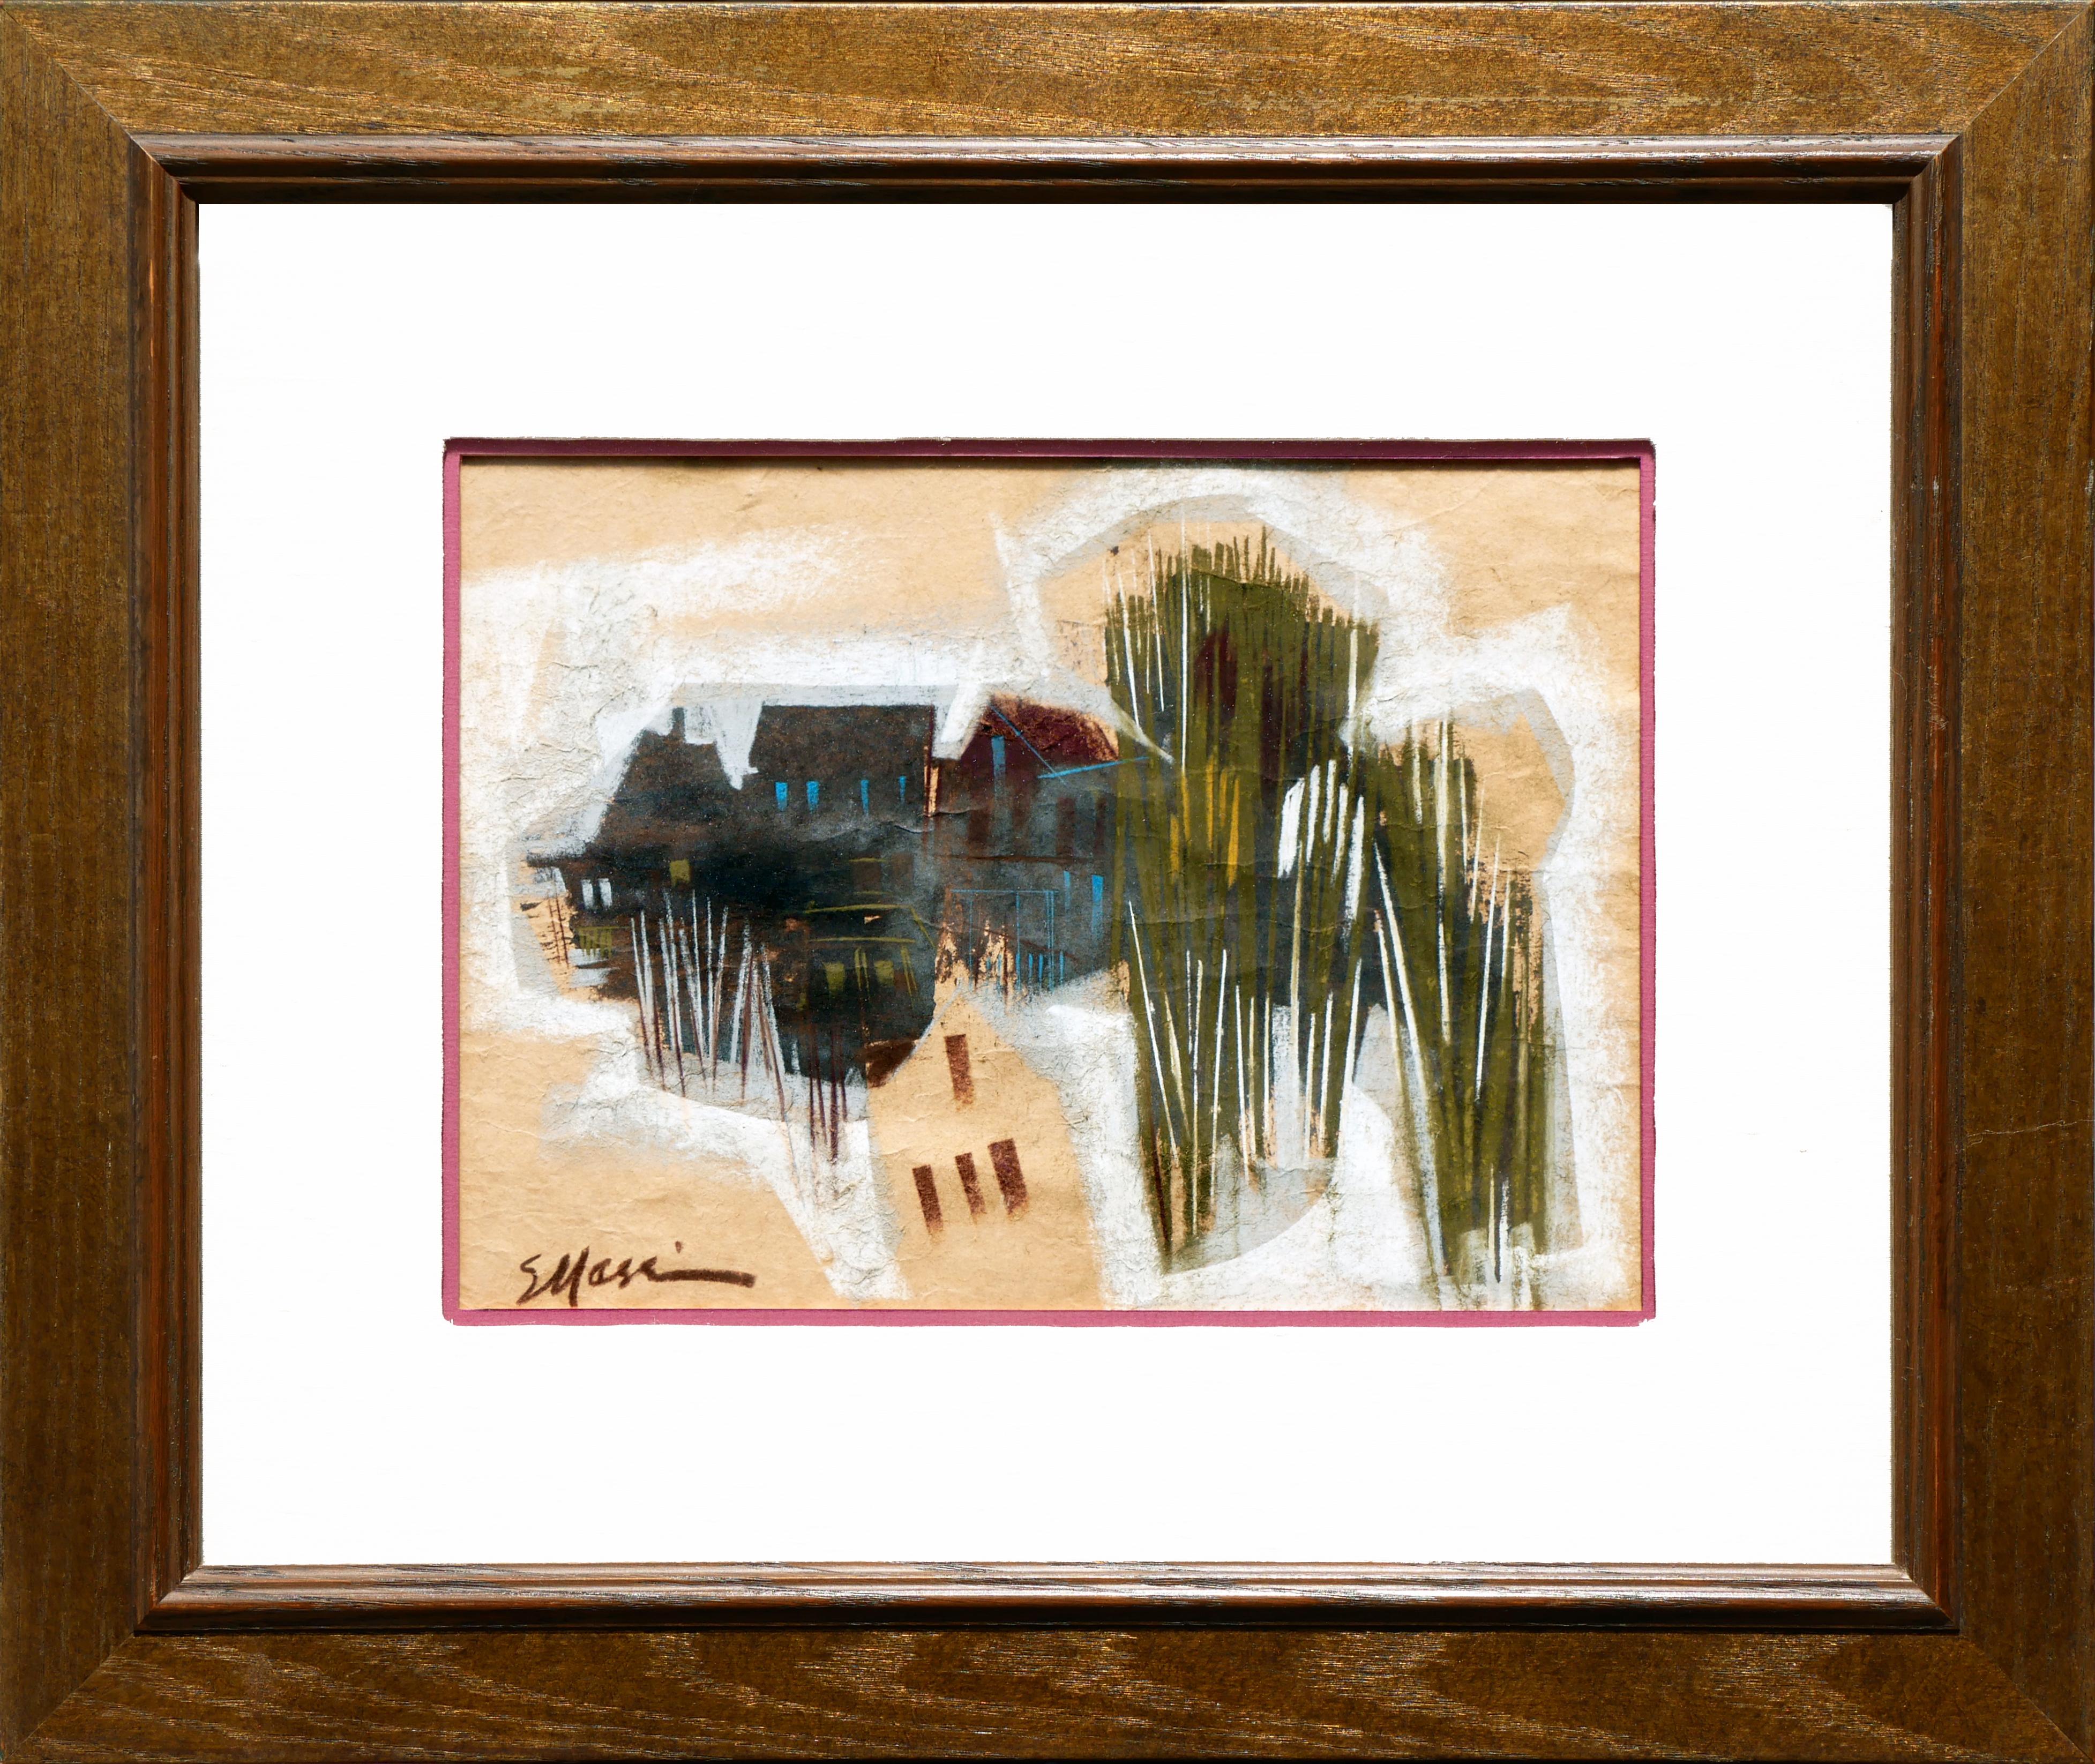 Dark Toned Modern Abstract Angular Landscape Drawing of a Small City or Village